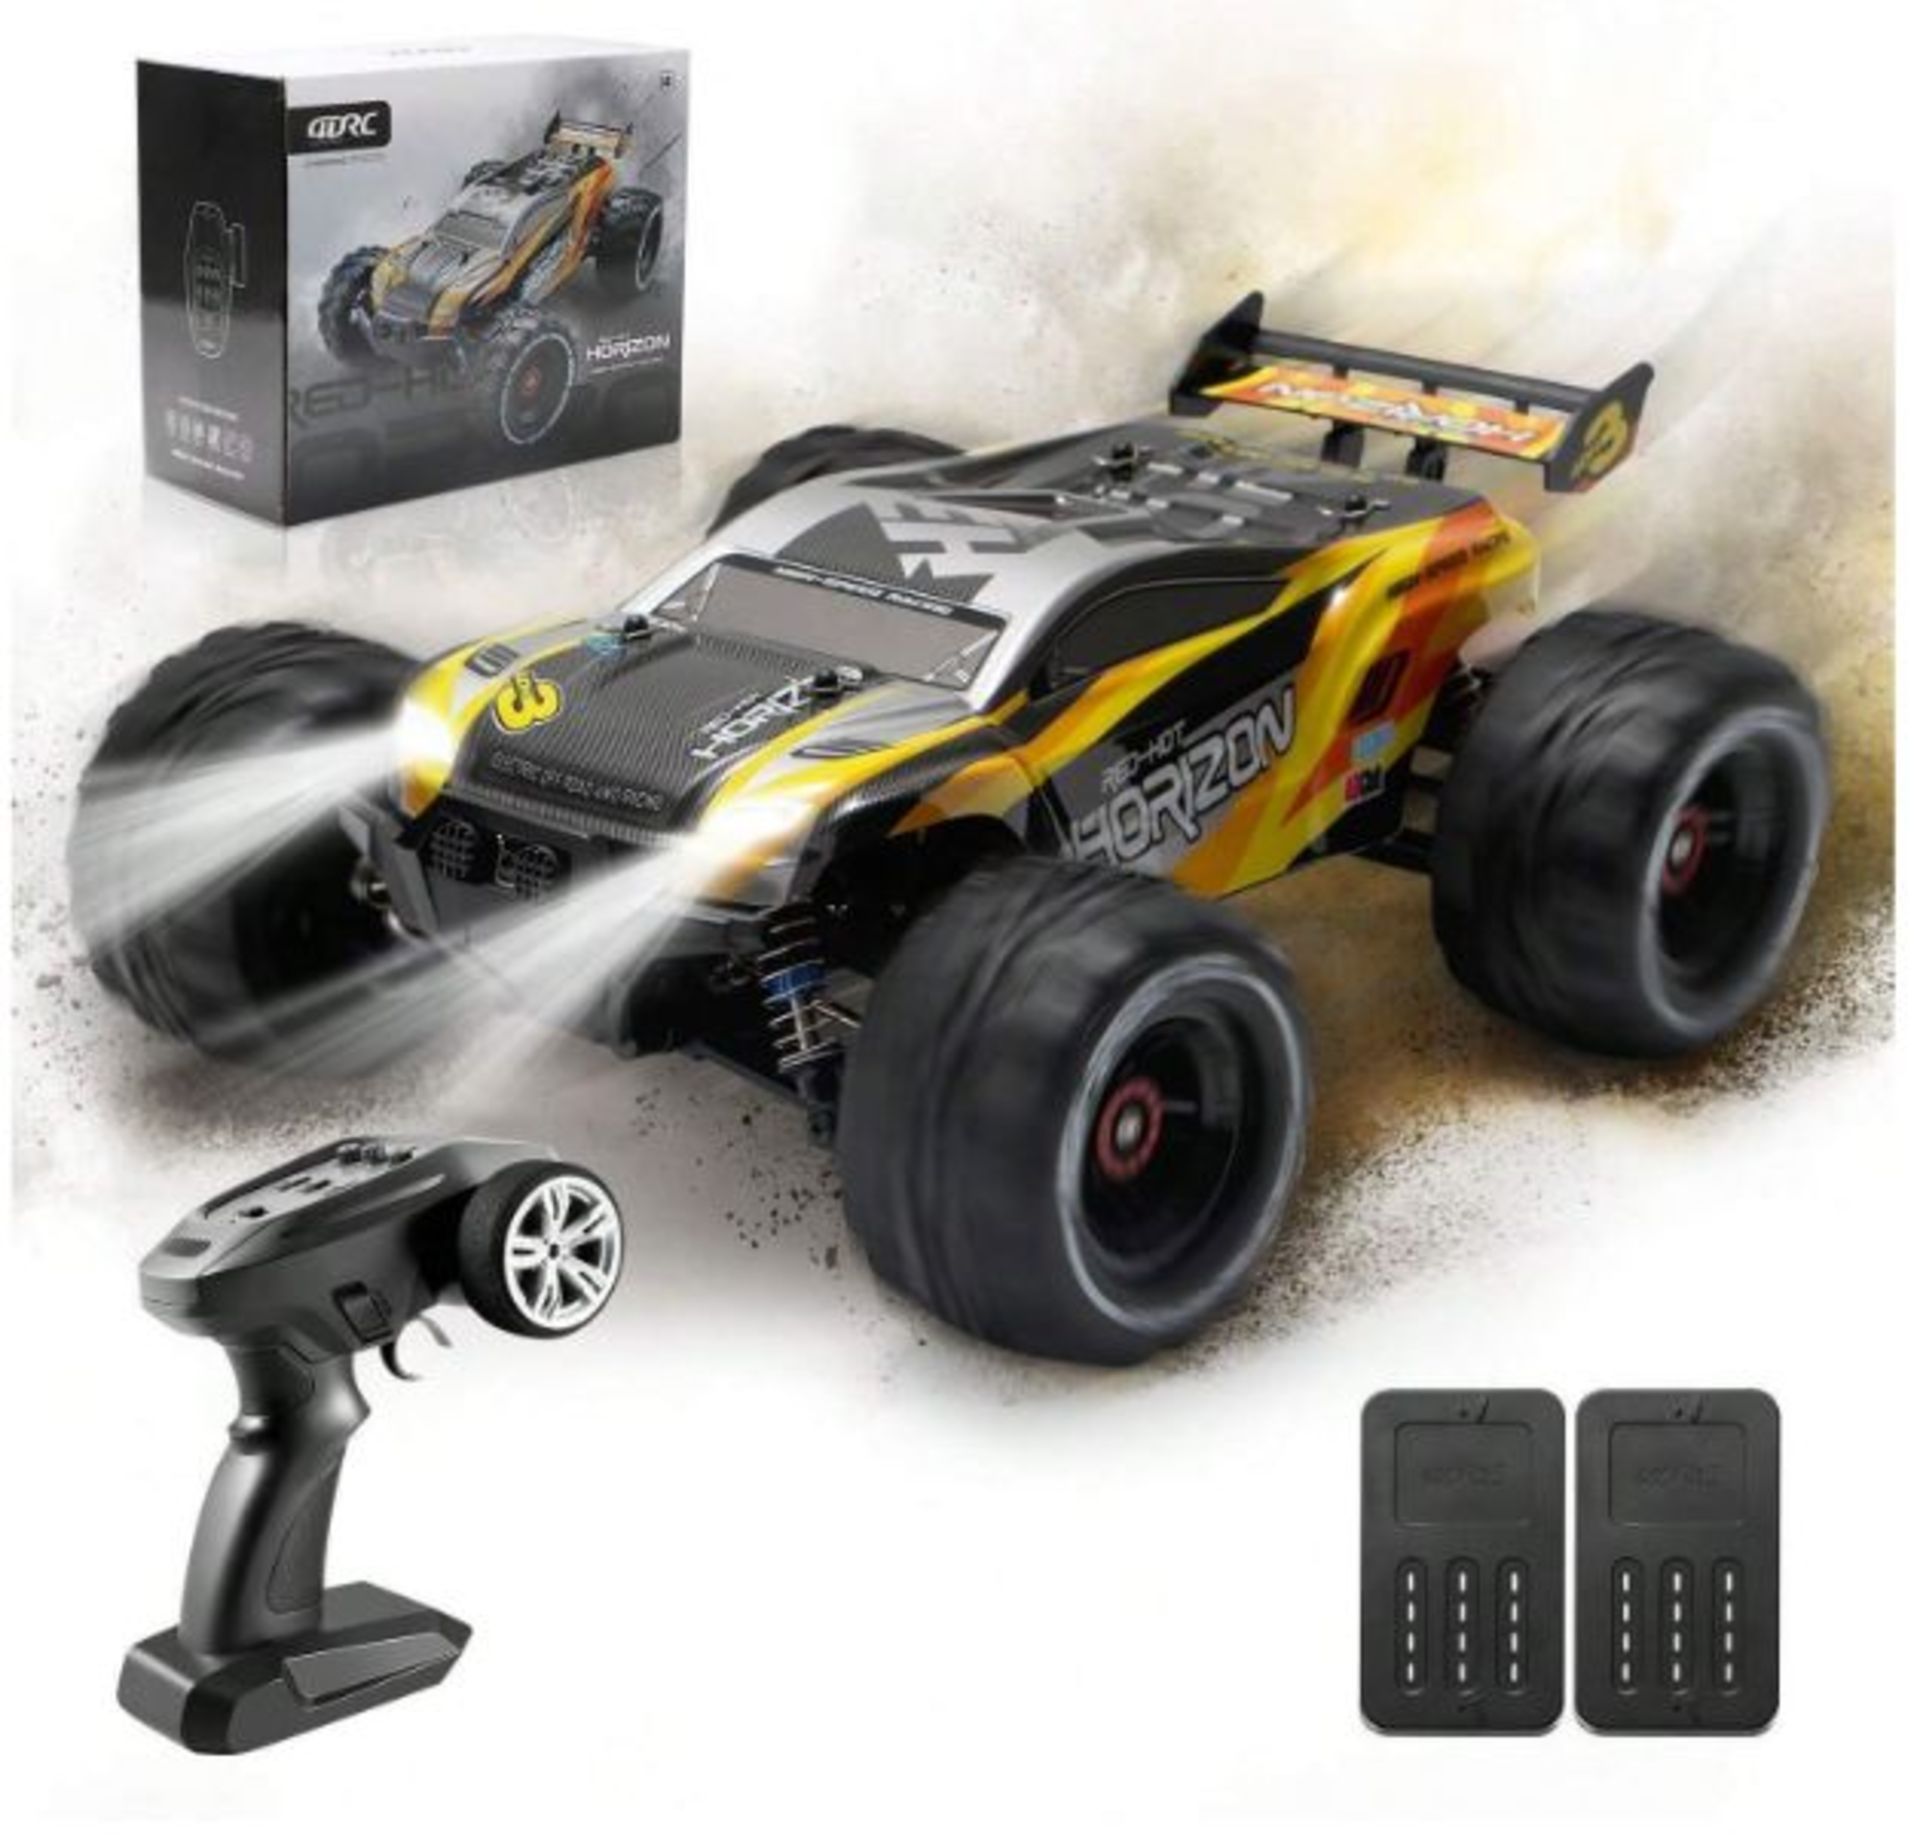 4DRC RC Cars For Adults, Max 70 KPH Fast RC Truck, 4WD All Terrain Remote Control Car. - ROW7.